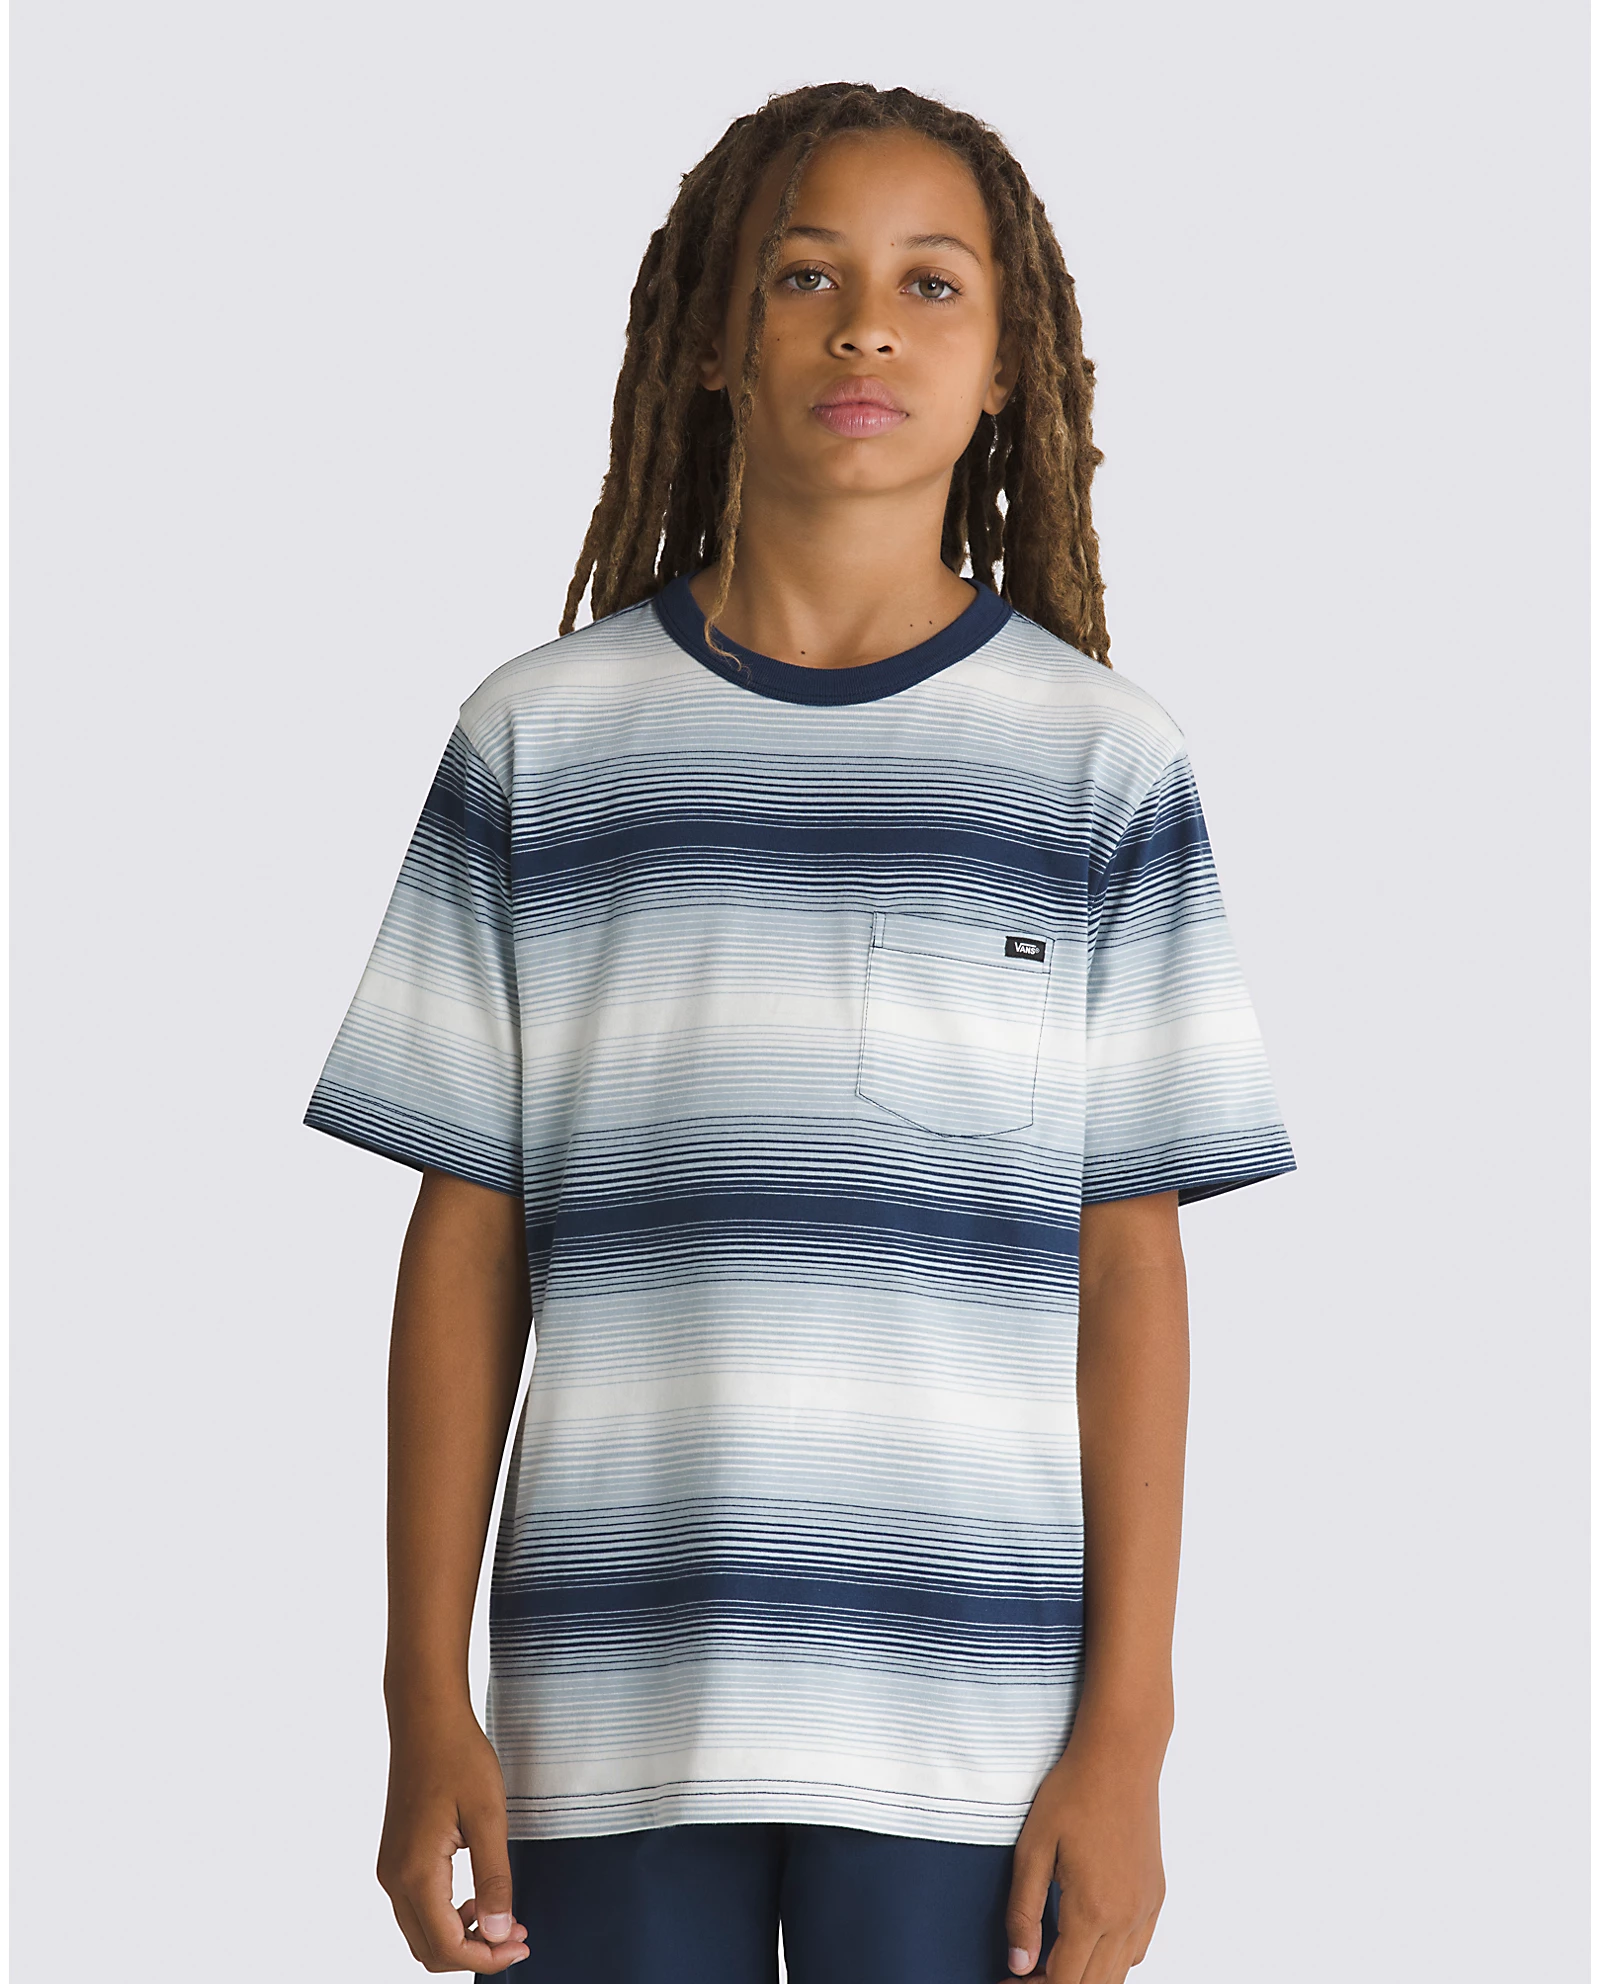 Vans YOUTH NATURES BOUNTY DRESS BLUES